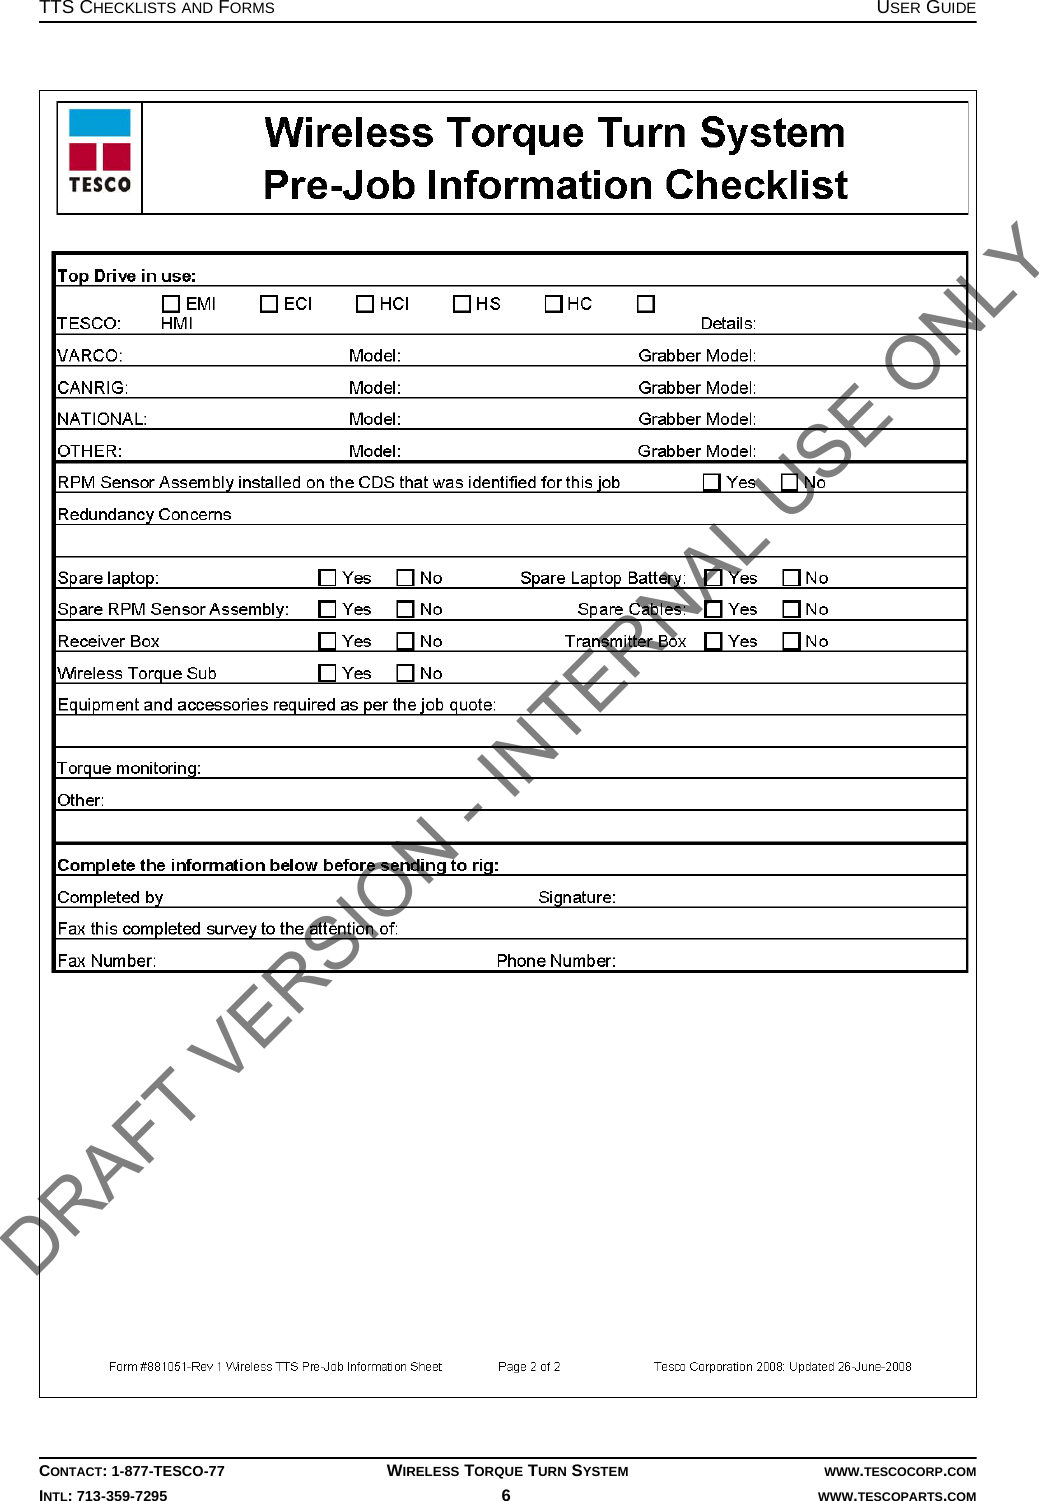 TTS CHECKLISTS AND FORMS USER GUIDECONTACT: 1-877-TESCO-77 WIRELESS TORQUE TURN SYSTEM WWW.TESCOCORP.COMINTL: 713-359-7295 6   WWW.TESCOPARTS.COMDRAFT VERSION - INTERNAL USE ONLY